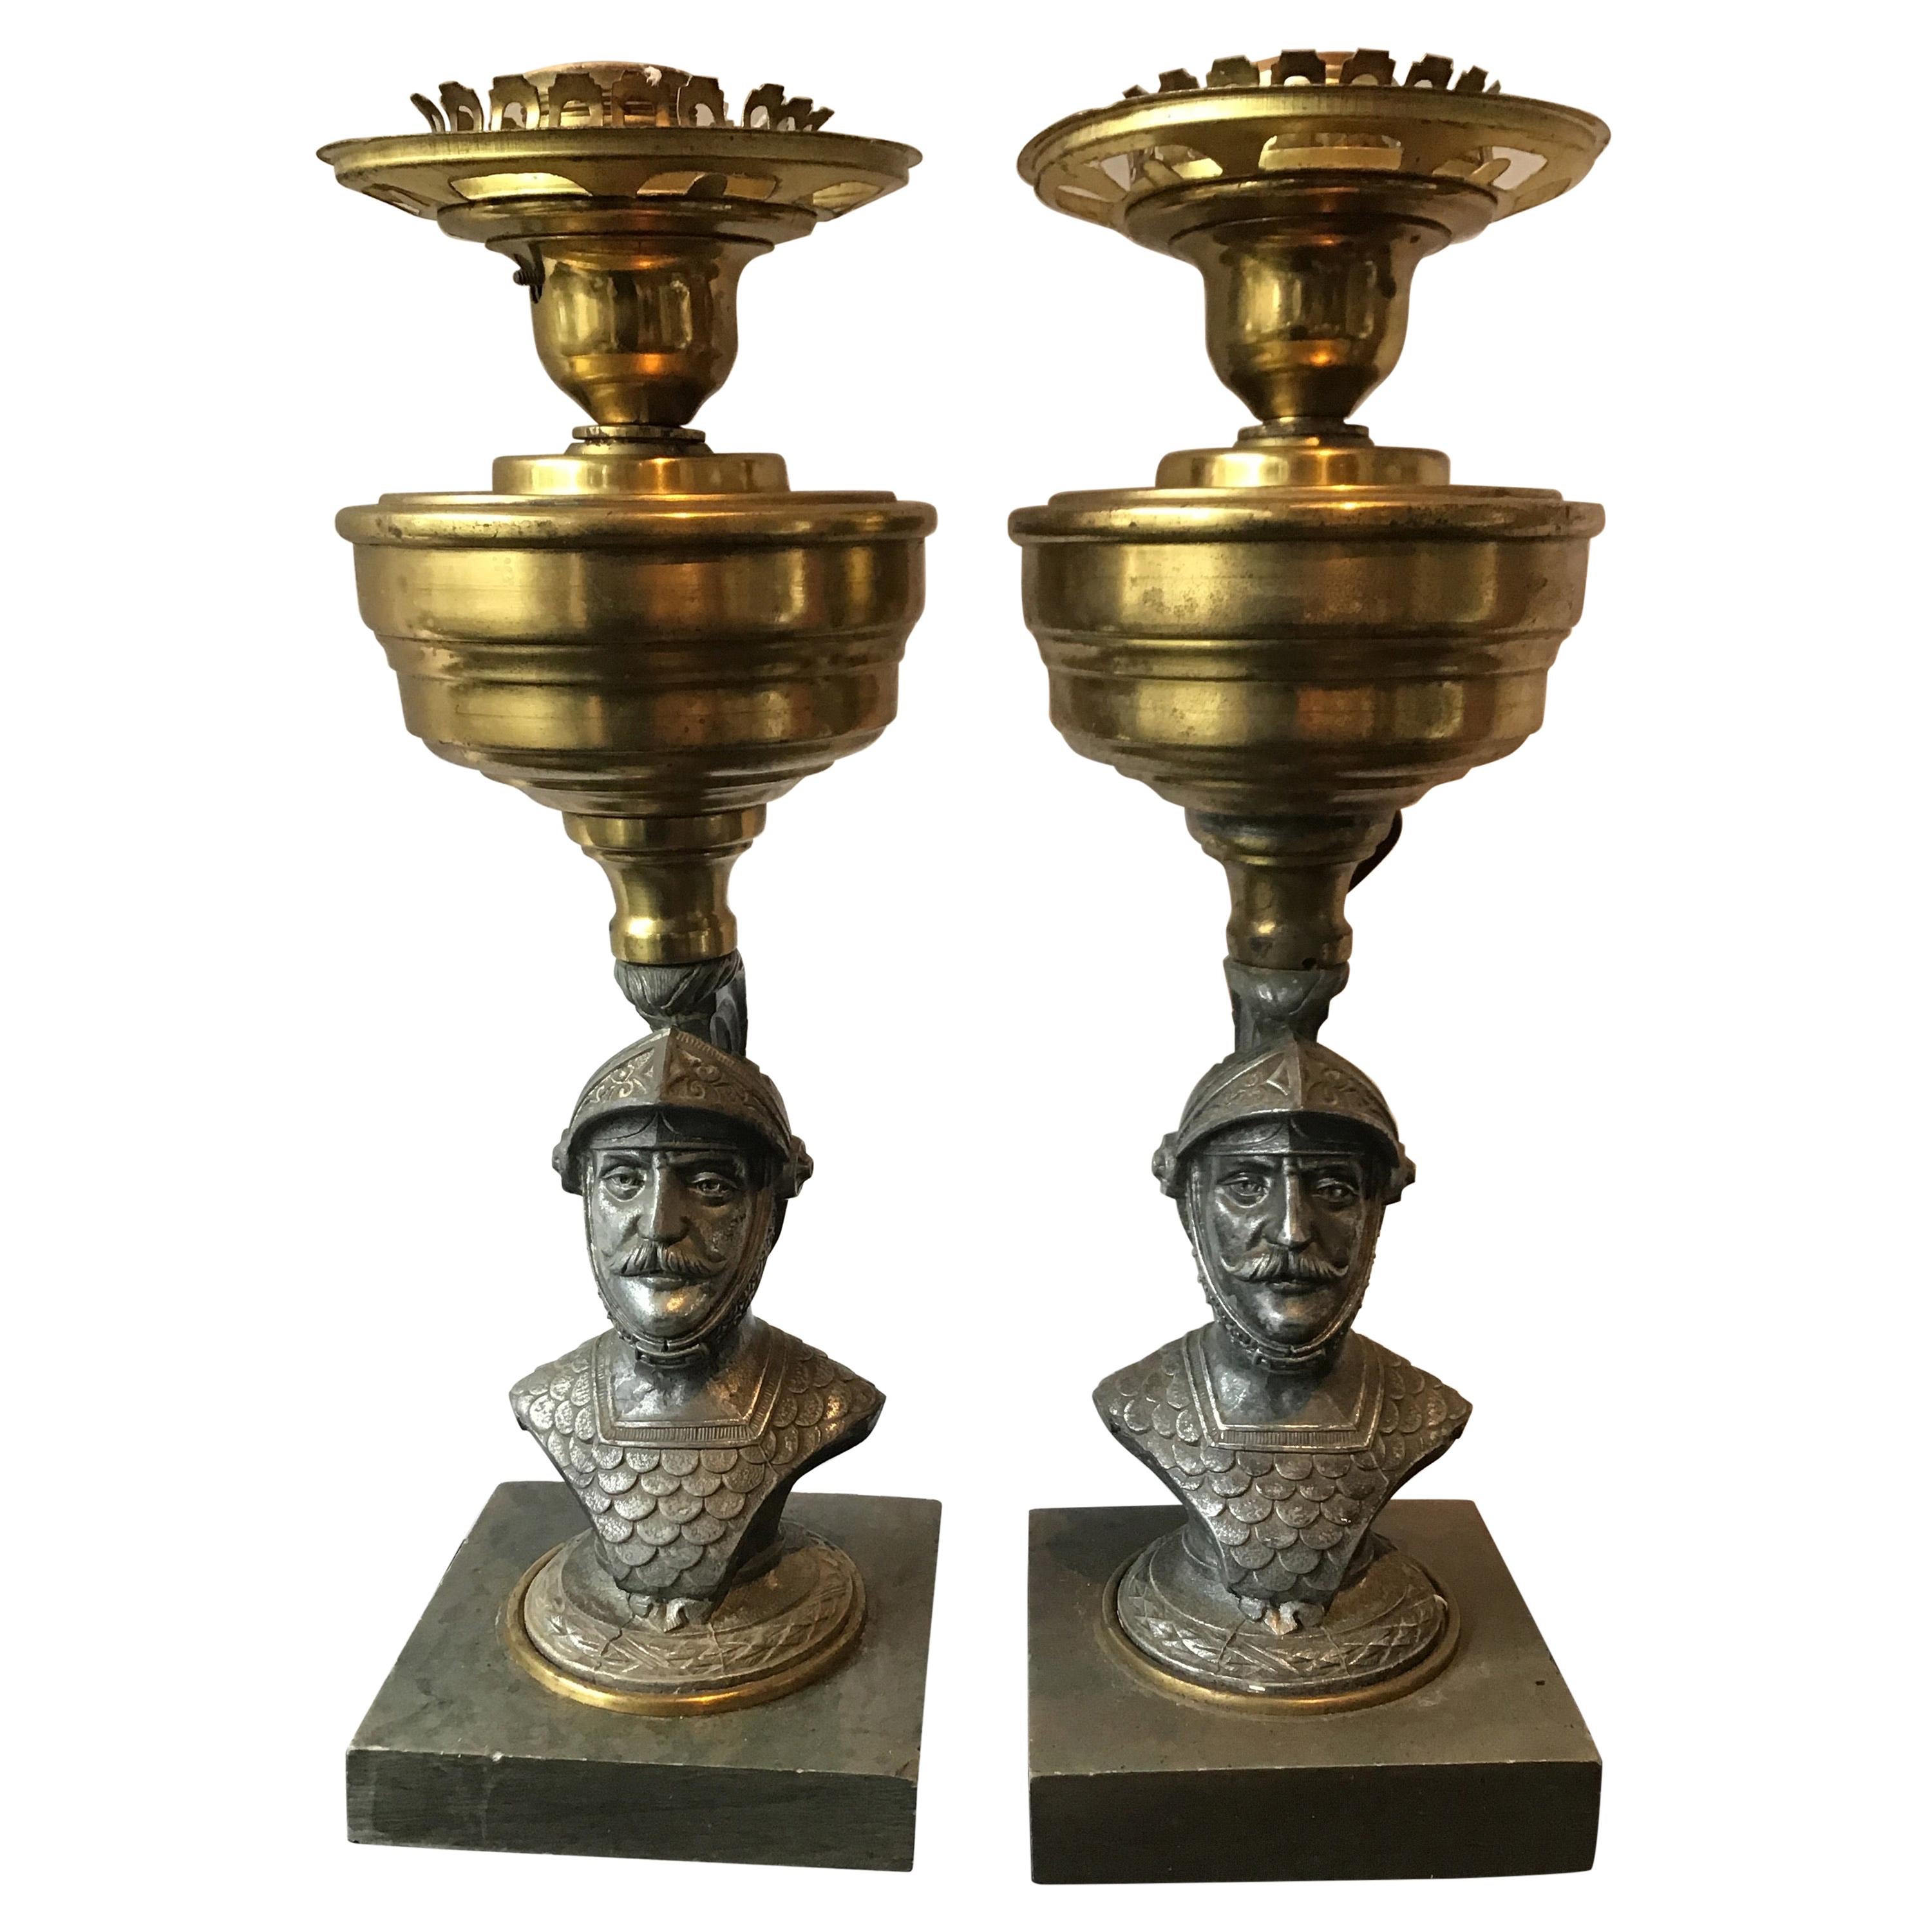 Pair of 1890s Knight Lamps on Stone Bases